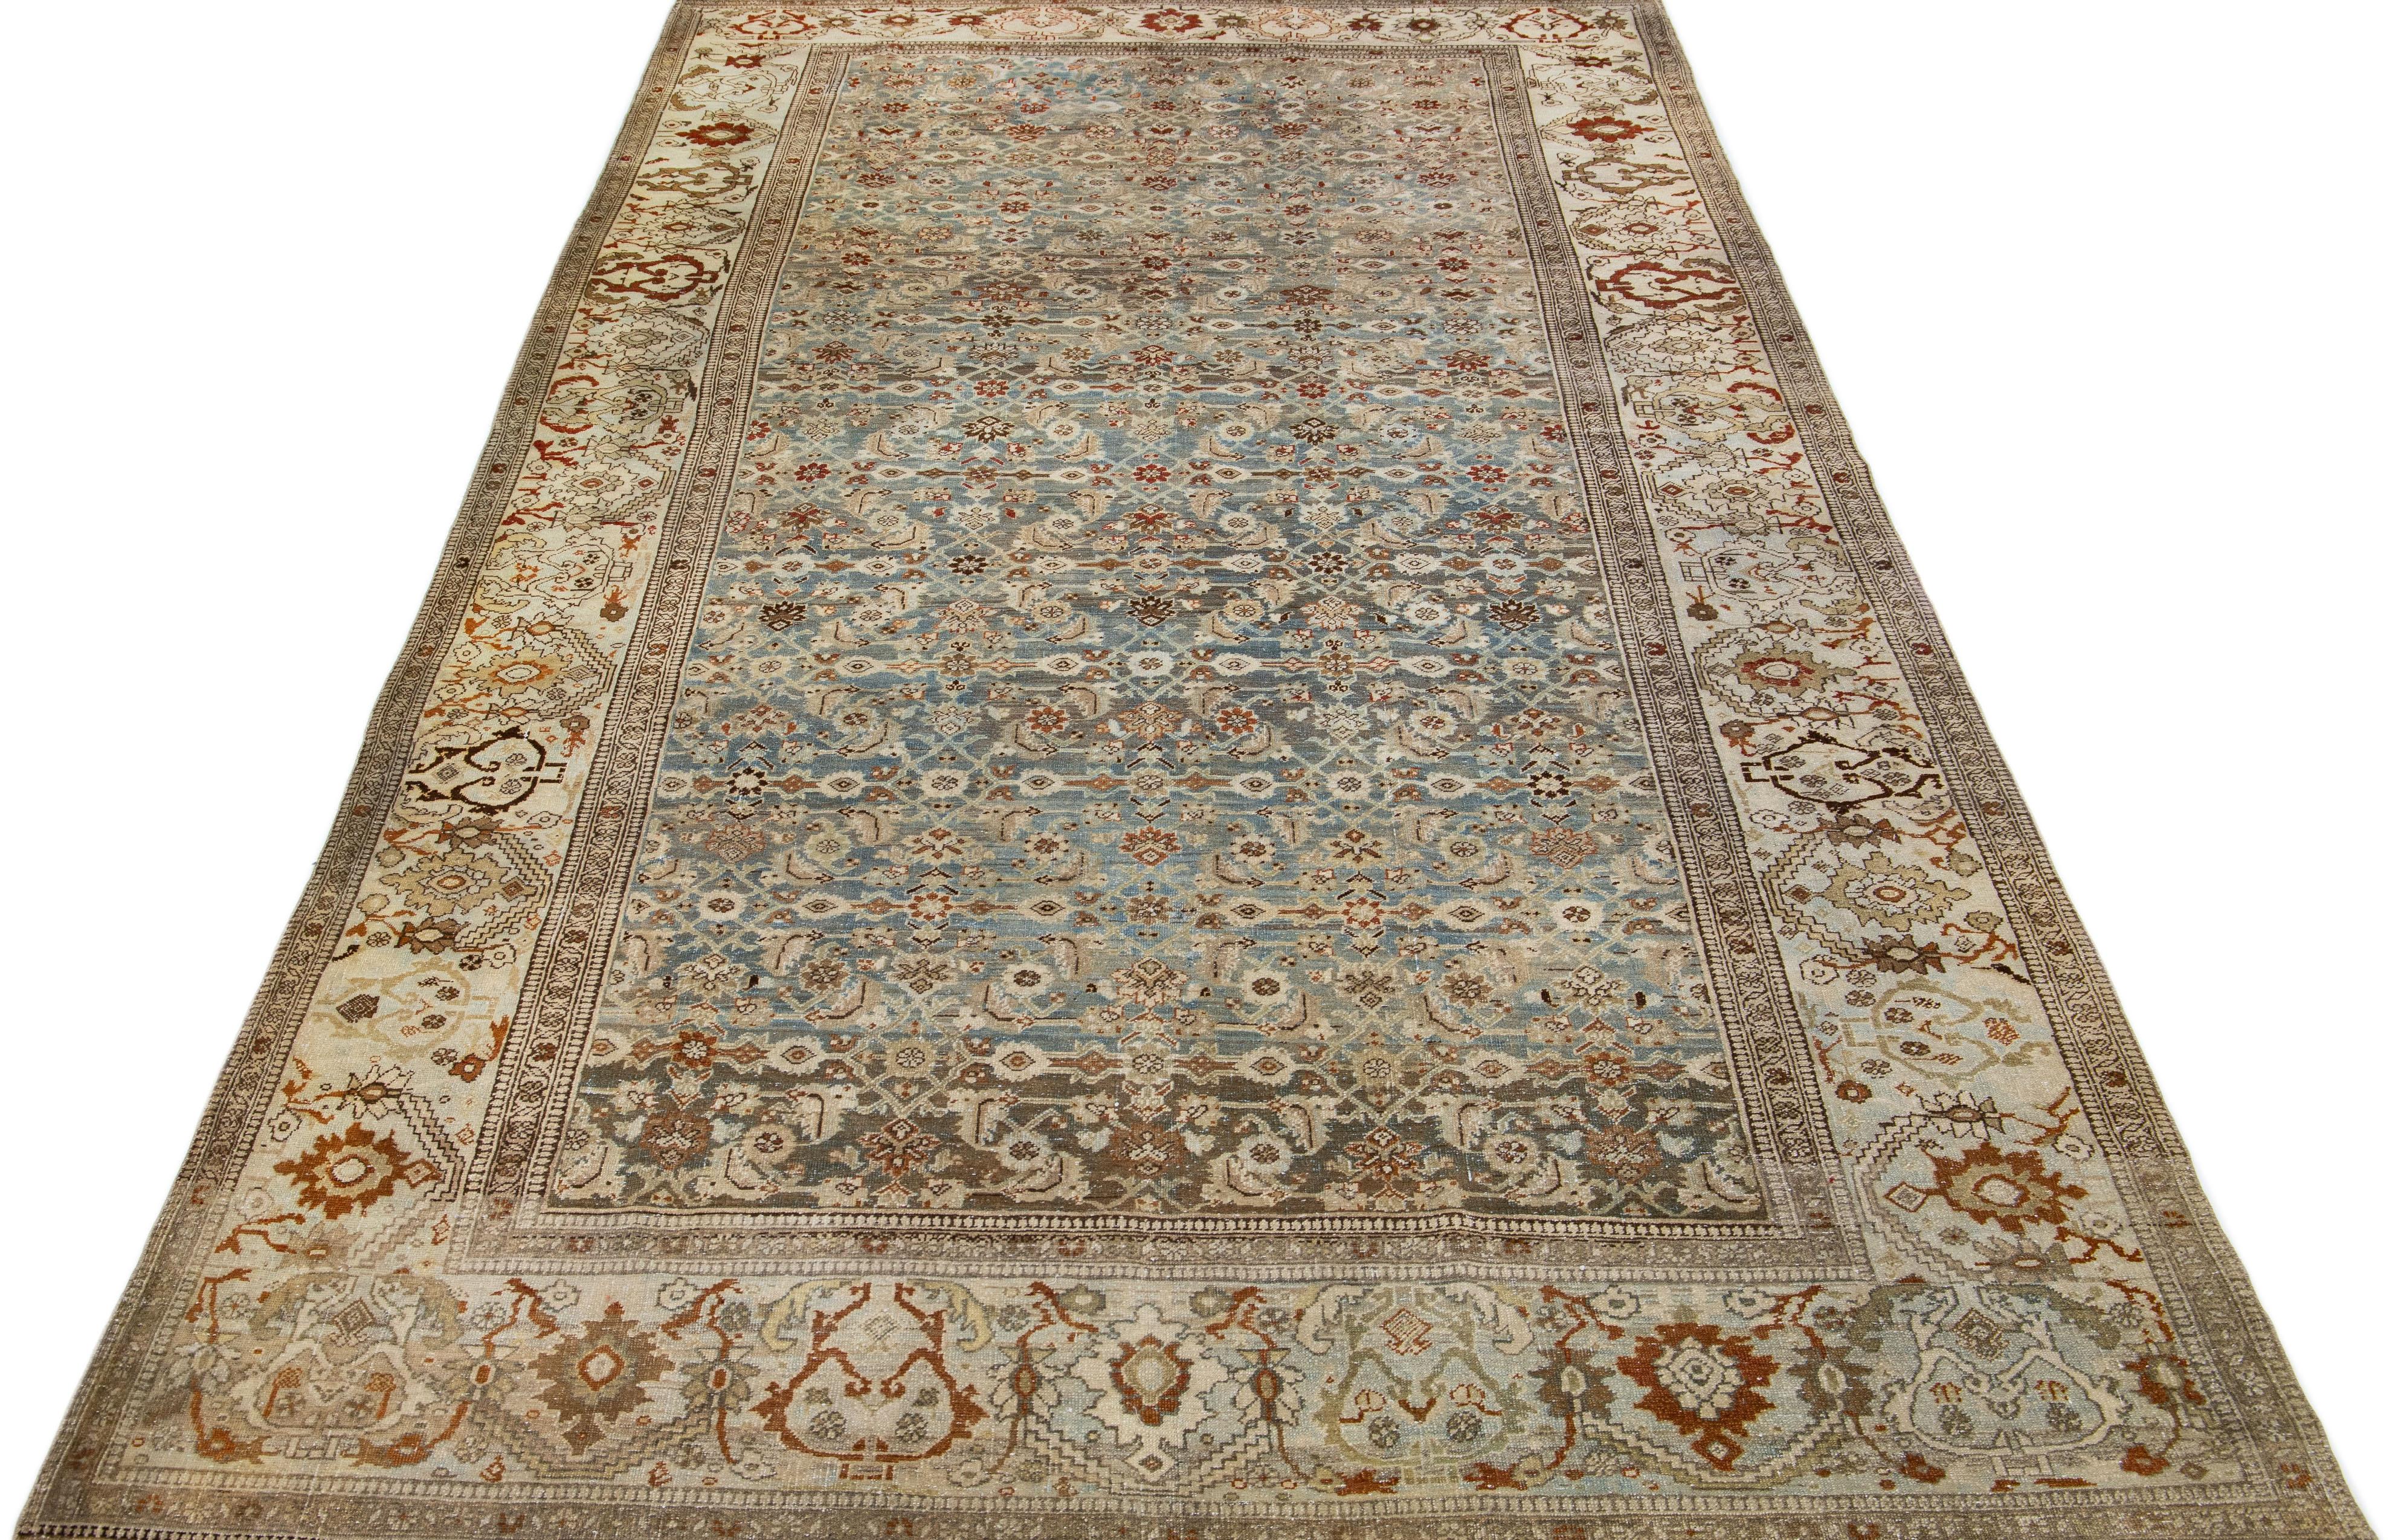 Beautiful antique Bidjar hand-knotted wool rug with a blue color field. This Persian rug has rust and brown accents in a gorgeous traditional floral design.

This rug measures 6'9